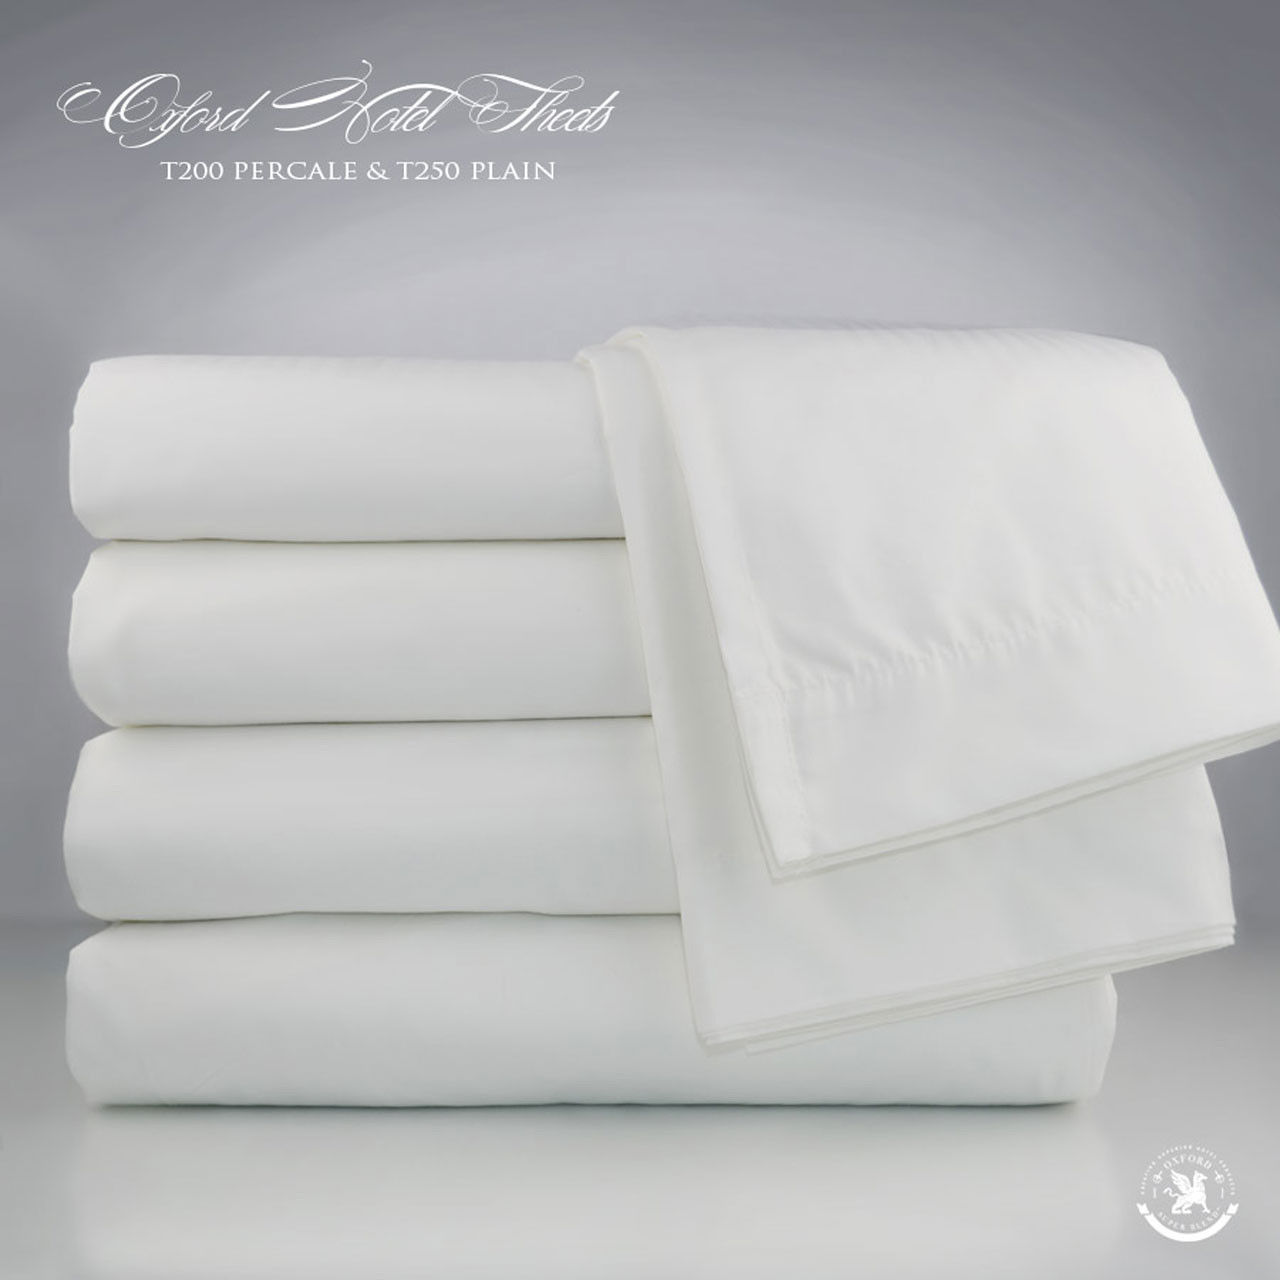 What makes the thread count of these Oxford Super Blend sheets unique?